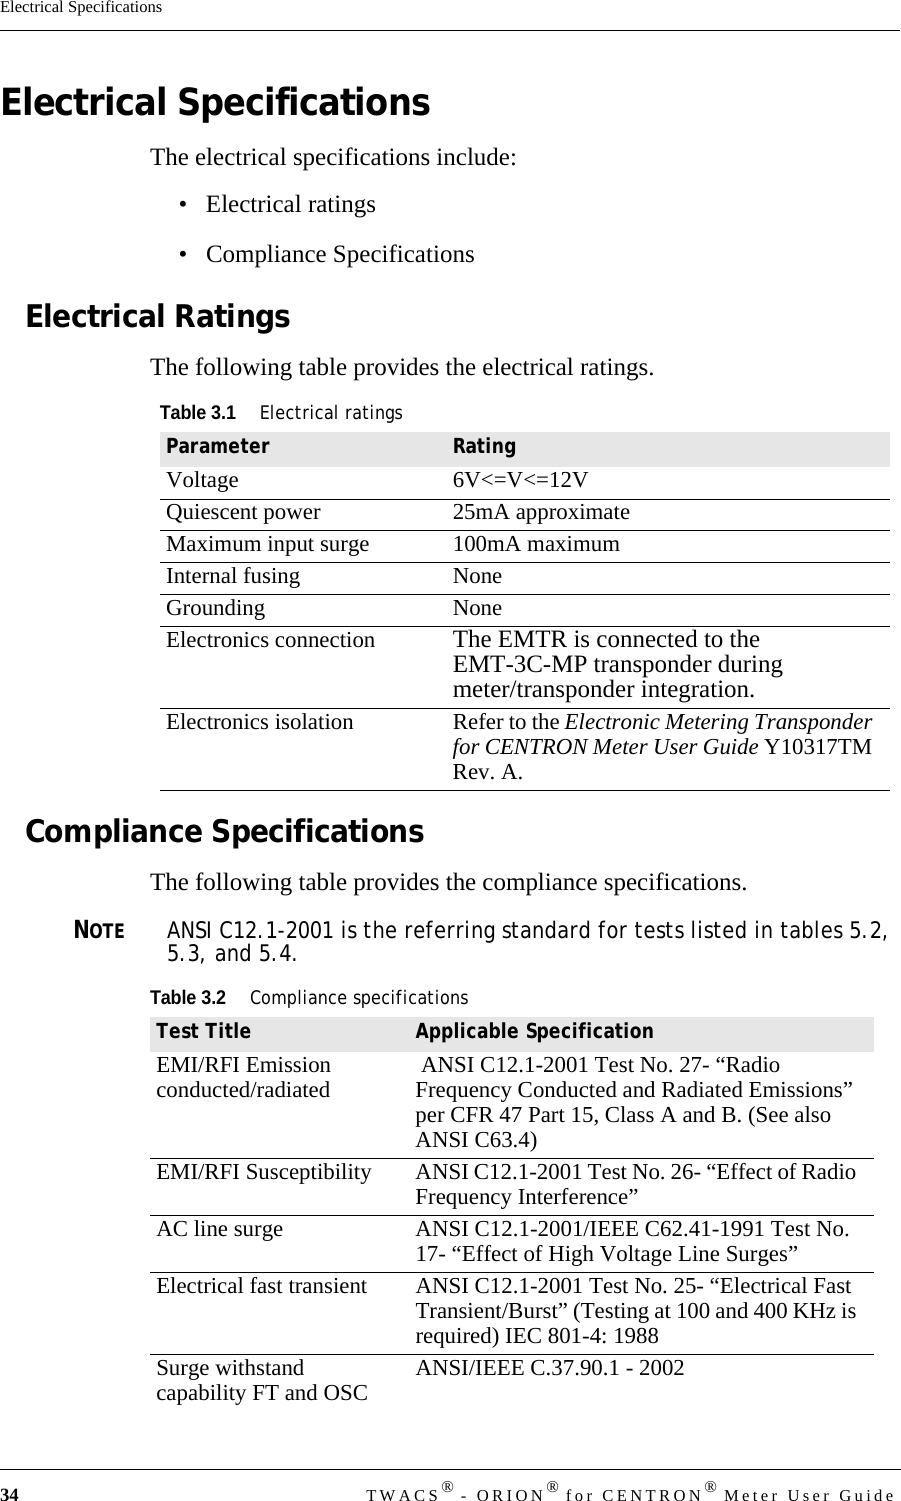 34 TWACS® - ORION® for CENTRON® Meter User GuideElectrical SpecificationsElectrical SpecificationsThe electrical specifications include:• Electrical ratings• Compliance SpecificationsElectrical RatingsThe following table provides the electrical ratings.Compliance SpecificationsThe following table provides the compliance specifications.NOTEANSI C12.1-2001 is the referring standard for tests listed in tables 5.2, 5.3, and 5.4. Table 3.1Electrical ratingsParameter RatingVoltage 6V&lt;=V&lt;=12VQuiescent power 25mA approximateMaximum input surge 100mA maximumInternal fusing NoneGrounding NoneElectronics connection The EMTR is connected to the EMT-3C-MP transponder during meter/transponder integration.Electronics isolation Refer to the Electronic Metering Transponder for CENTRON Meter User Guide Y10317TM Rev. A.Table 3.2Compliance specificationsTest Title Applicable SpecificationEMI/RFI Emission conducted/radiated  ANSI C12.1-2001 Test No. 27- “Radio Frequency Conducted and Radiated Emissions” per CFR 47 Part 15, Class A and B. (See also ANSI C63.4)EMI/RFI Susceptibility ANSI C12.1-2001 Test No. 26- “Effect of Radio Frequency Interference” AC line surge ANSI C12.1-2001/IEEE C62.41-1991 Test No. 17- “Effect of High Voltage Line Surges” Electrical fast transient ANSI C12.1-2001 Test No. 25- “Electrical Fast Transient/Burst” (Testing at 100 and 400 KHz is required) IEC 801-4: 1988 Surge withstand capability FT and OSC ANSI/IEEE C.37.90.1 - 2002